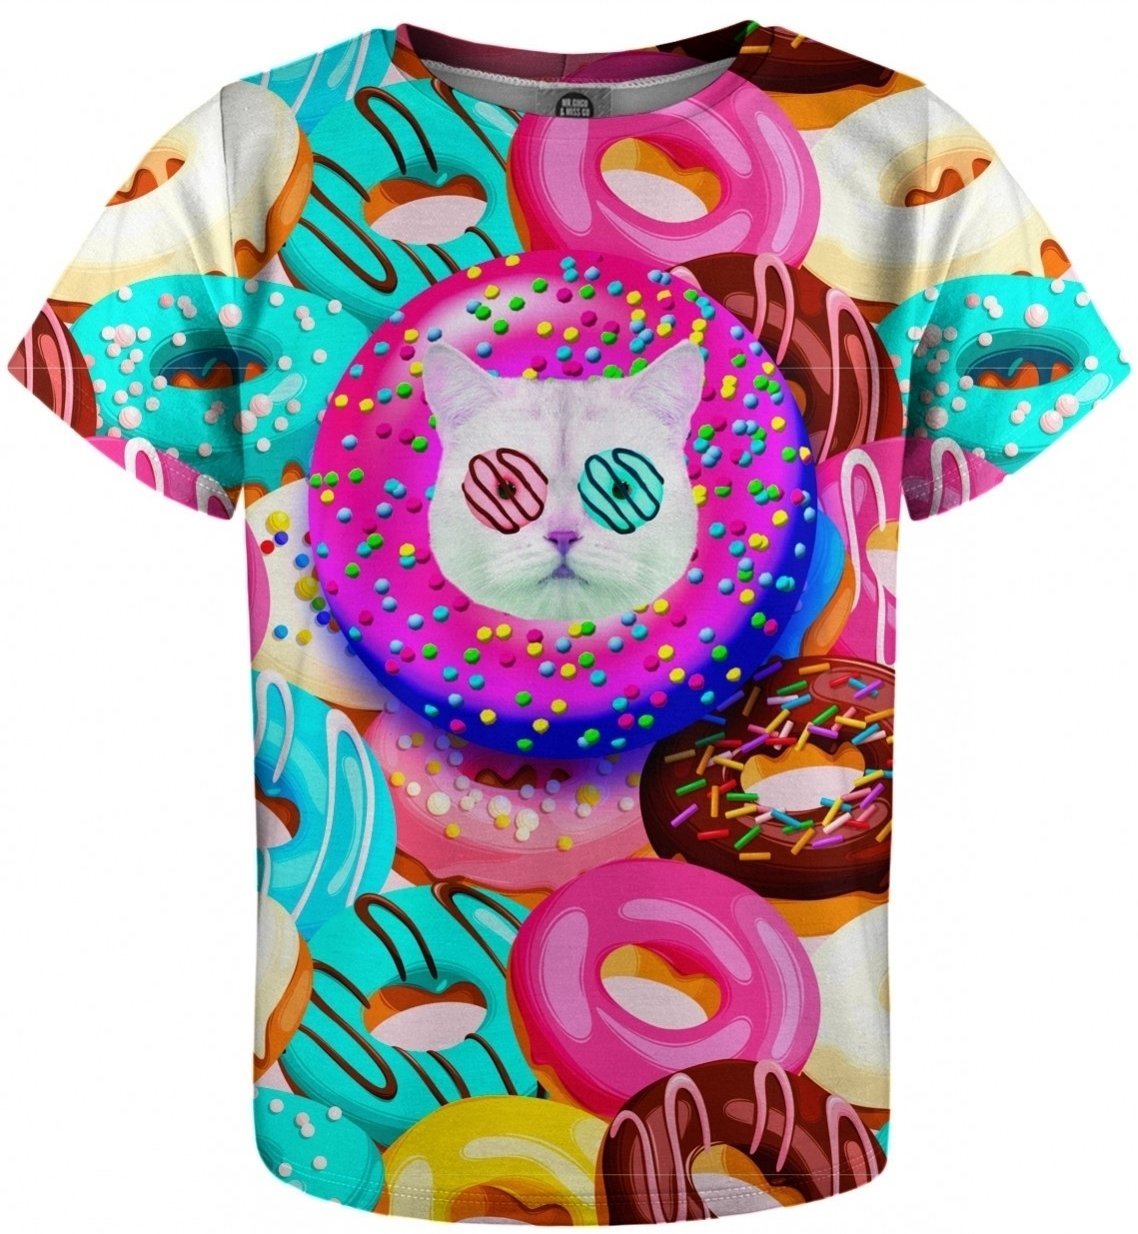 T-shirt Mr. Gugu and Miss Go T-shirt Donut Cat T-Shirt for Kids 10 - 12 Y